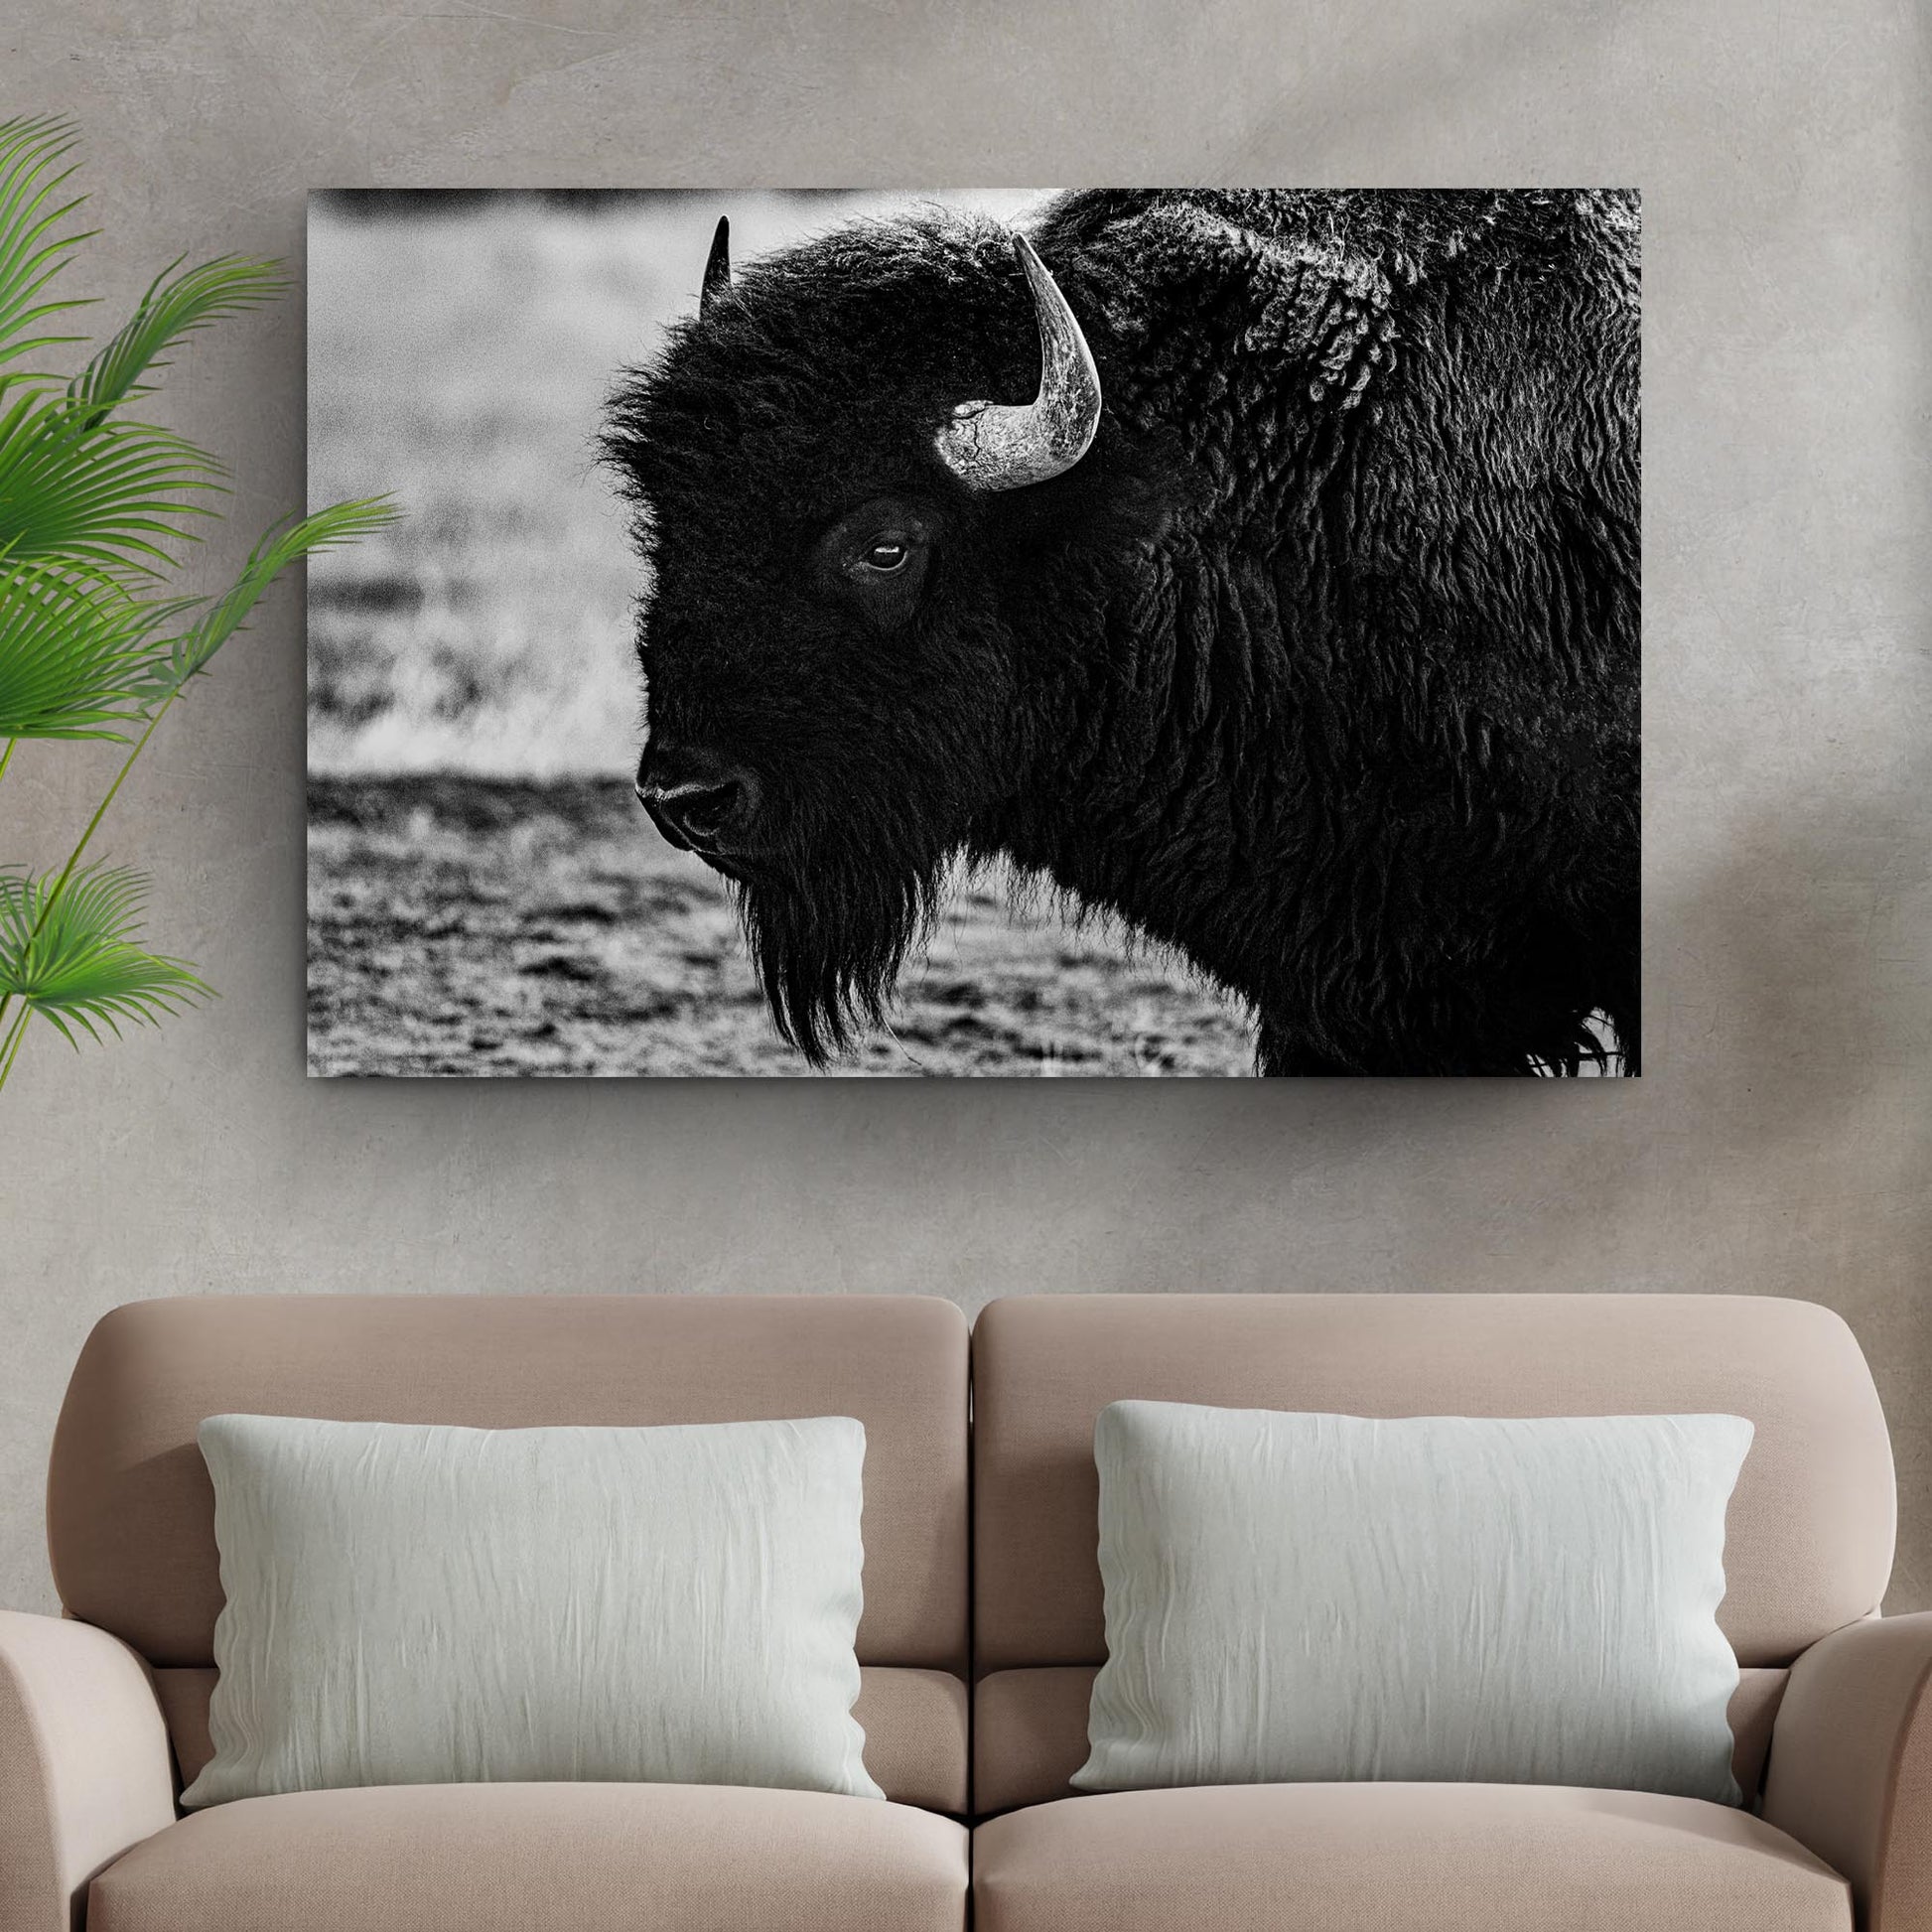 Black and White Bison Canvas Wall Art - Image by Tailored Canvases